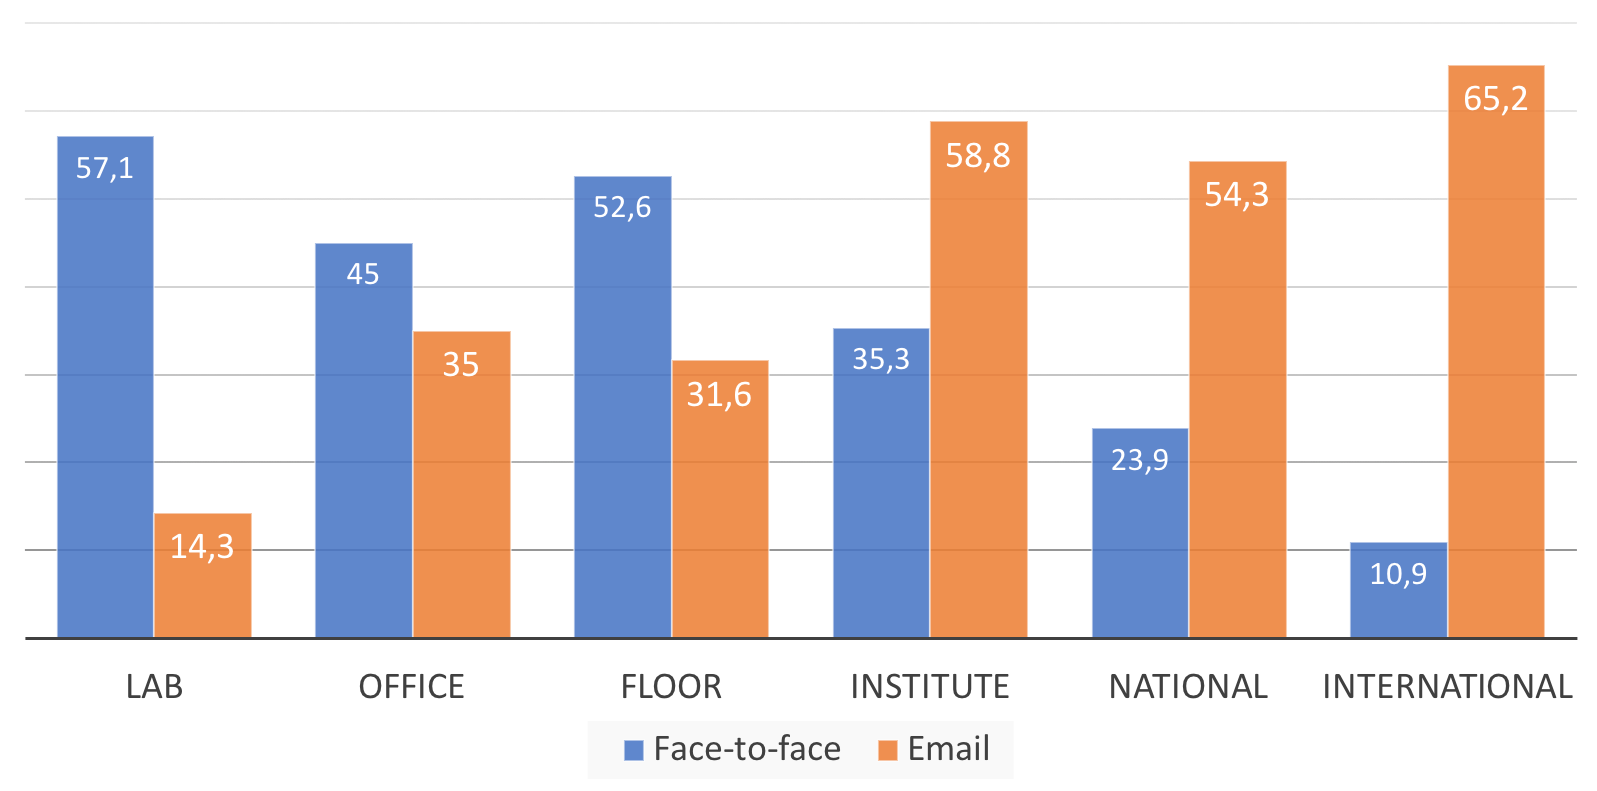 Main means of communication within the collaboration per distance, showing the percentage of responses.[fig:barcomms]